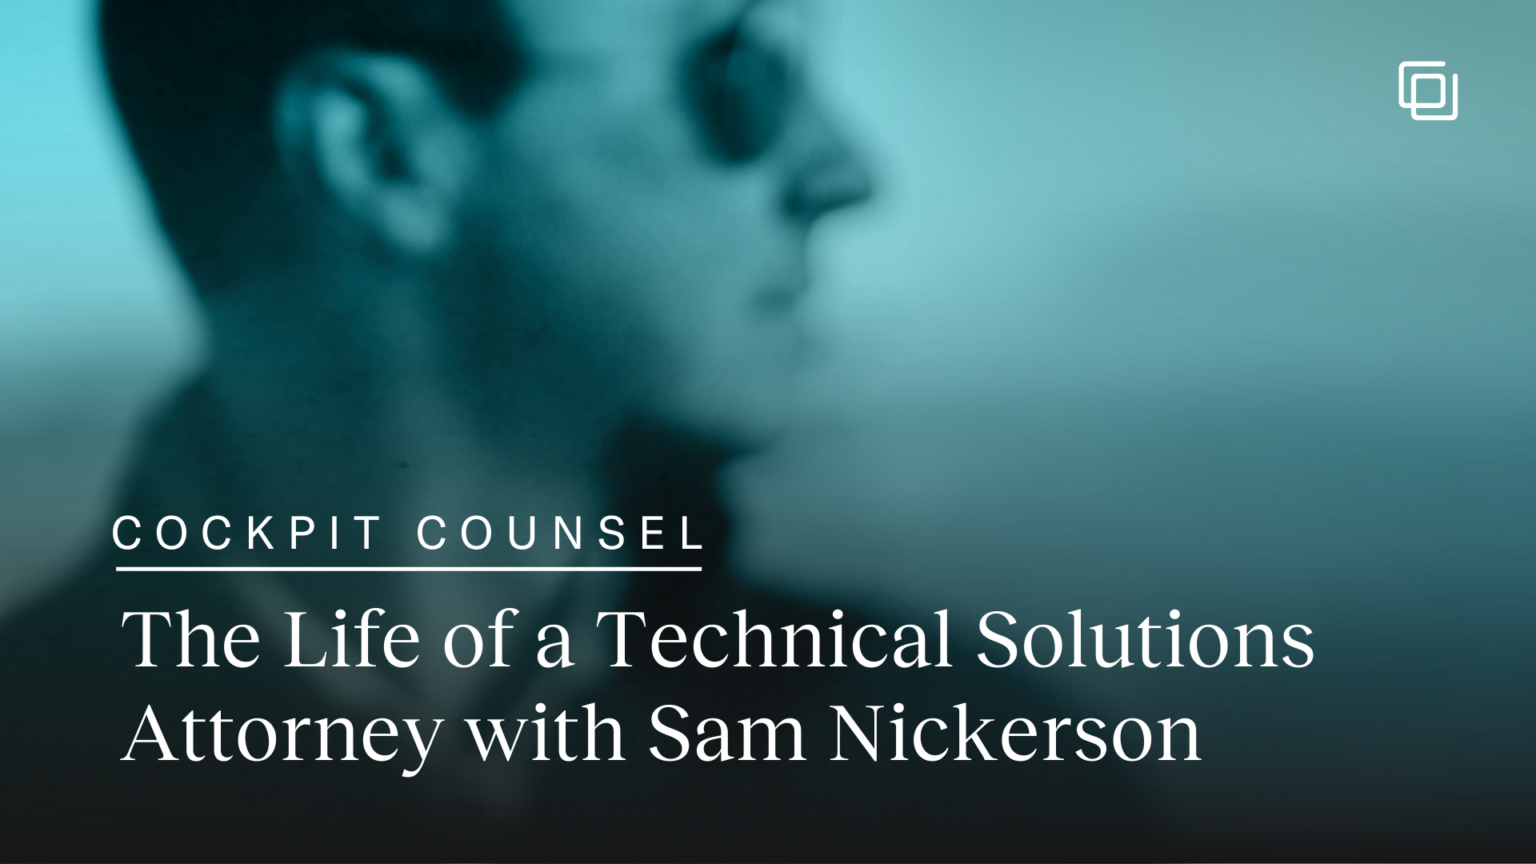 Cockpit Counsel: The Life of a Technical Solutions Attorney with Sam Nickerson